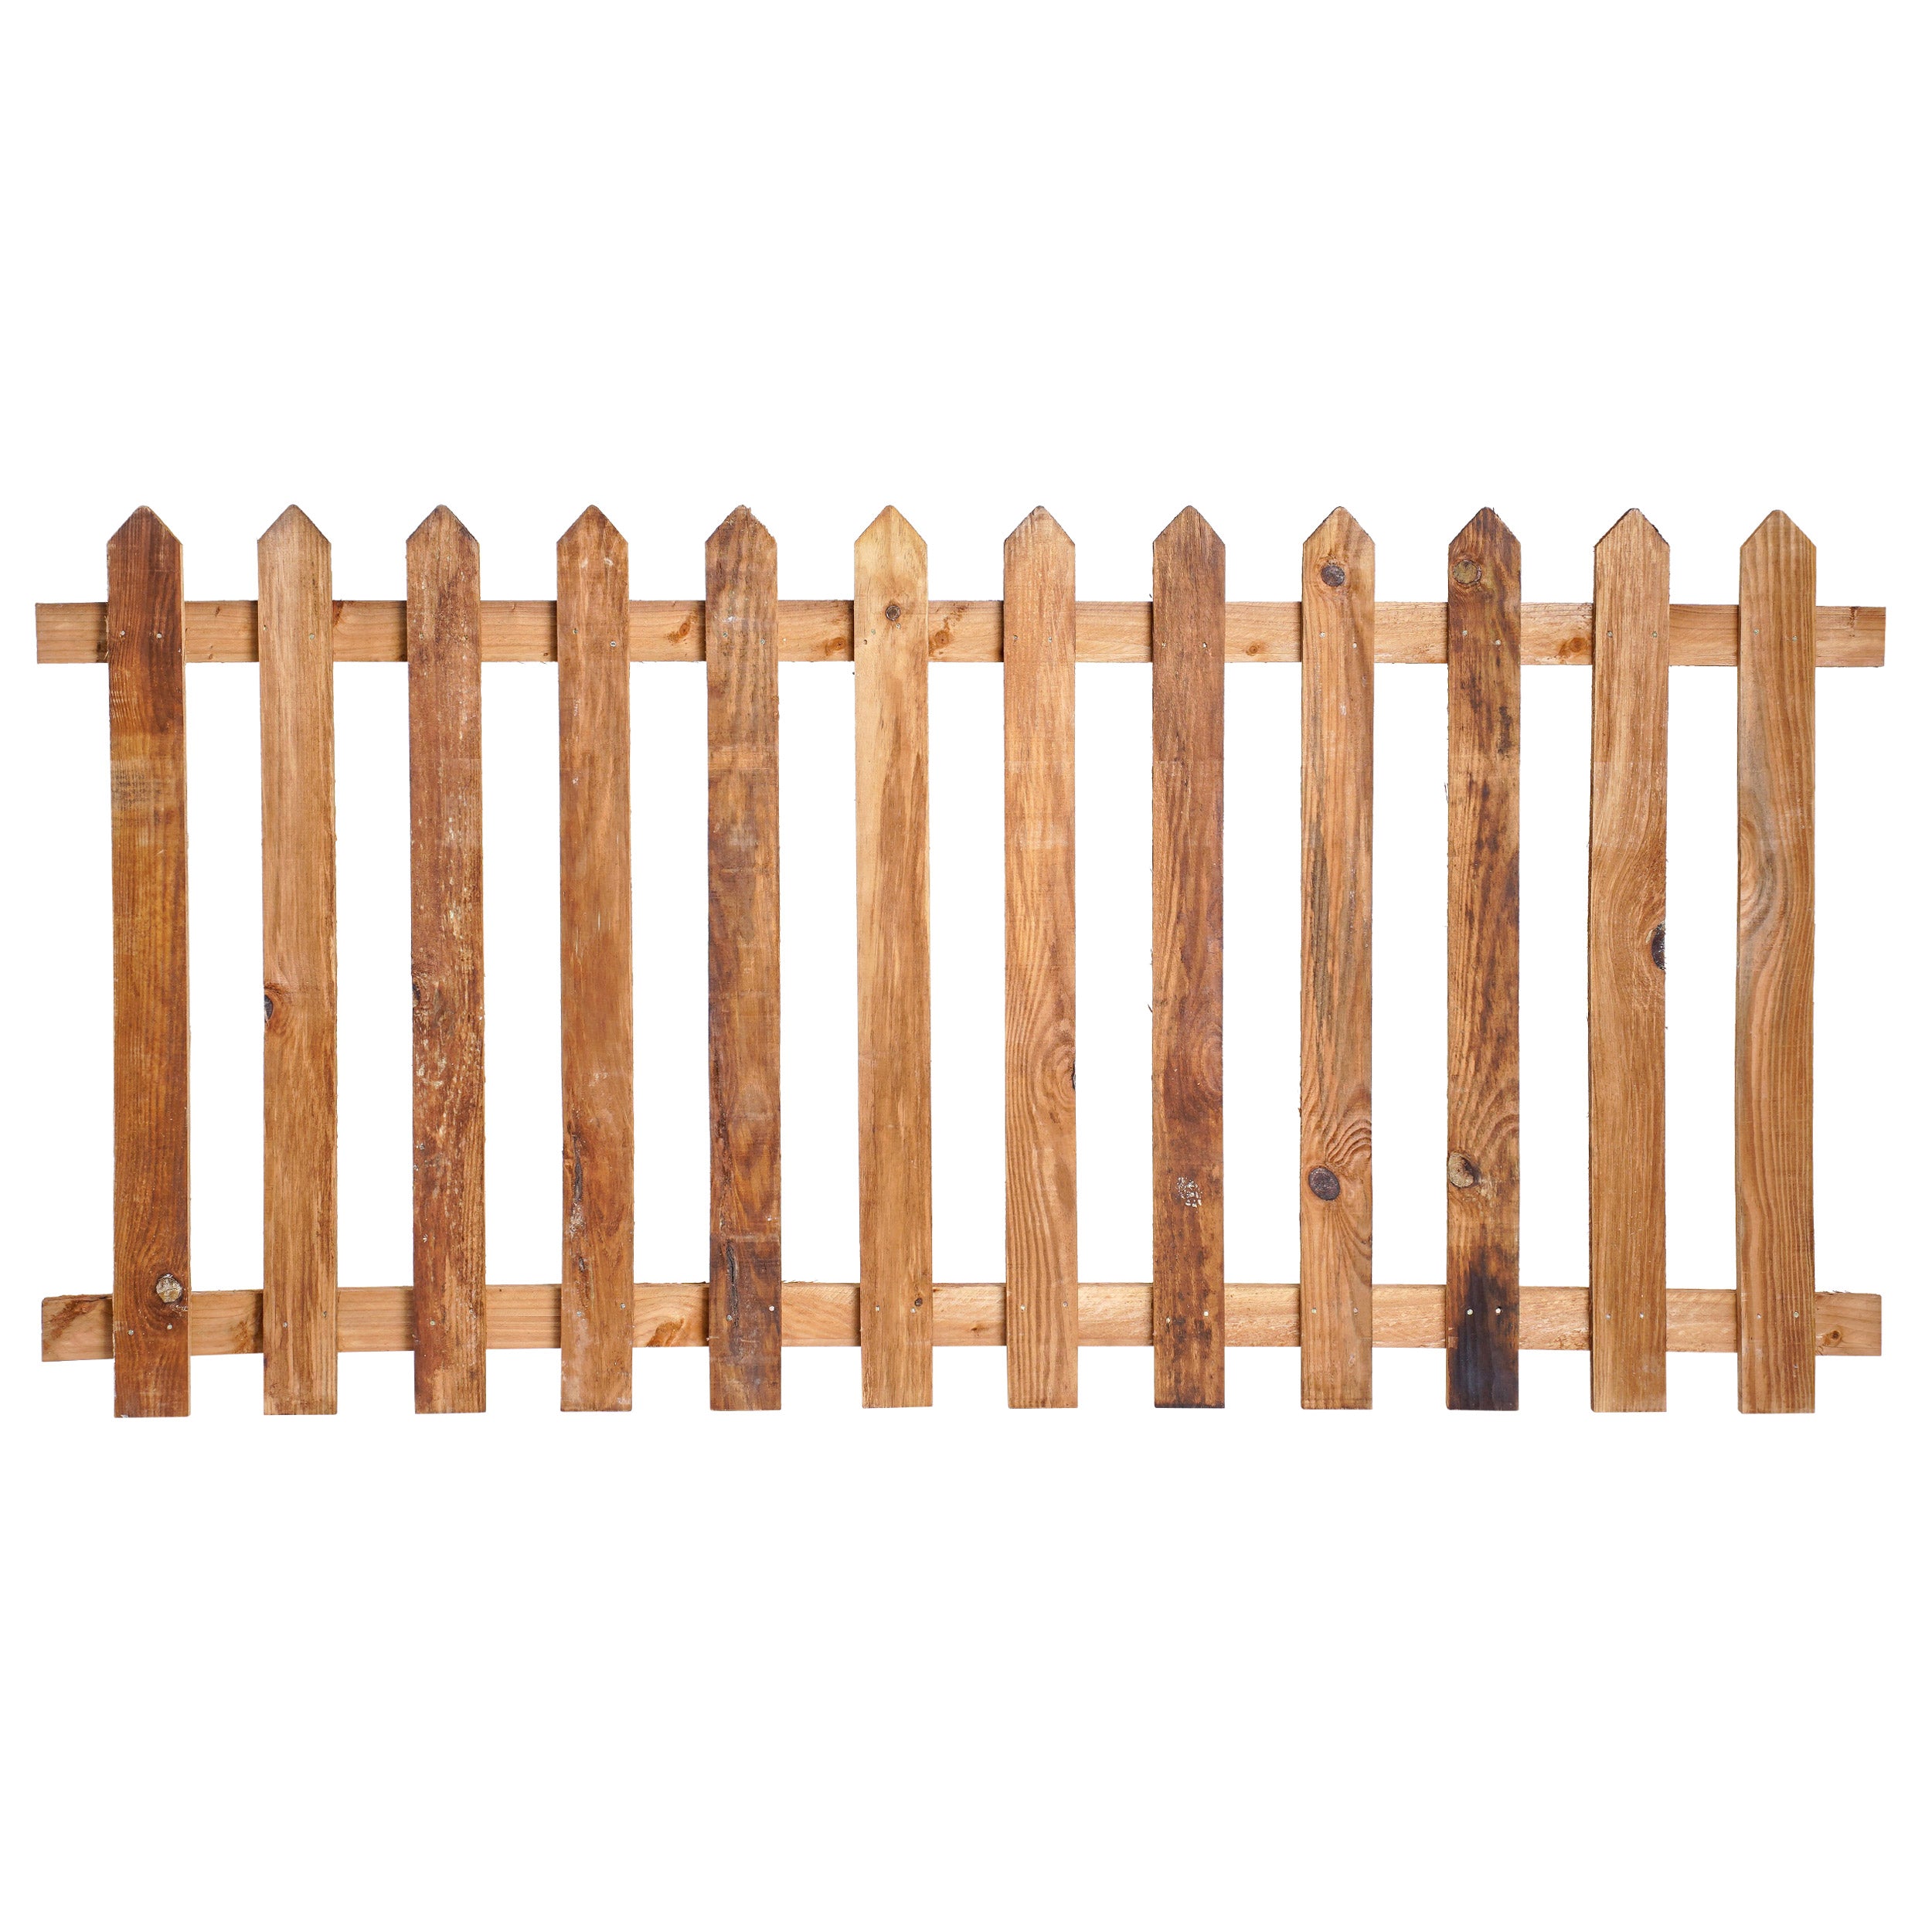 6ft x 3ft Picket Fence Panel Point Top - Pressure Treated Brown